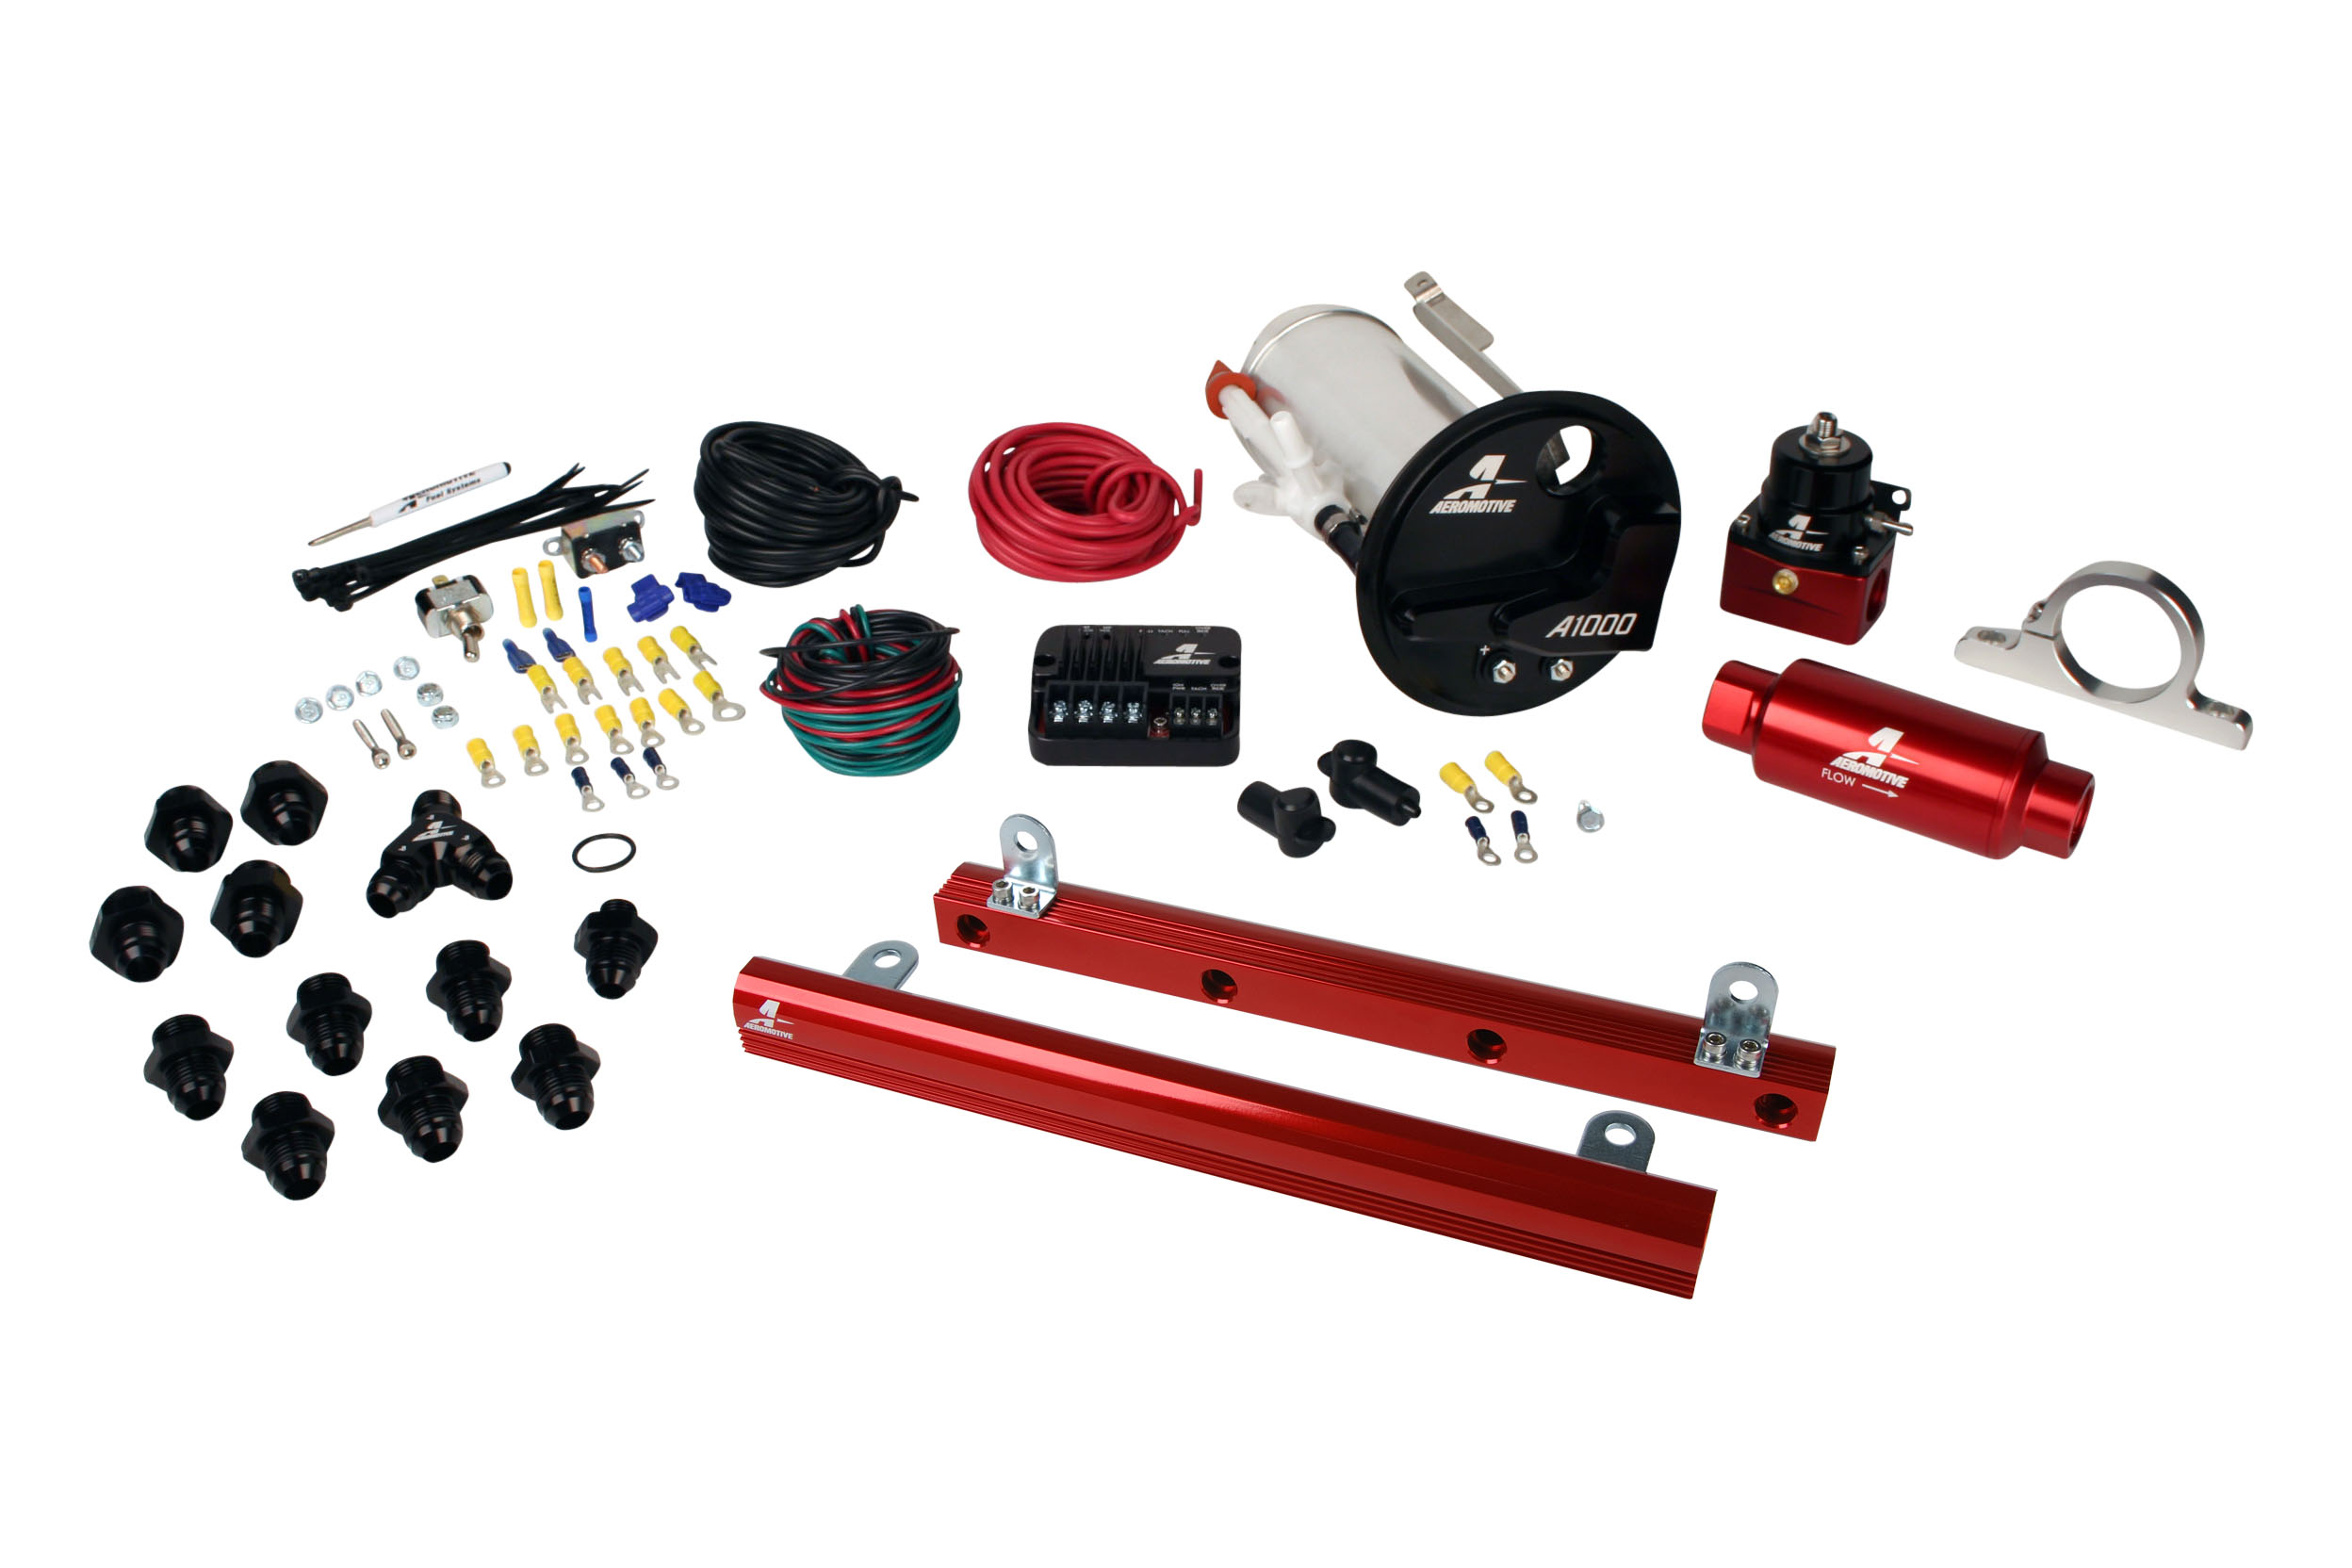 2007-2012 Ford Mustang Shelby GT500 Aeromotive Stealth A1000 Street Fuel System w/5.4L CJ Fuel Rails